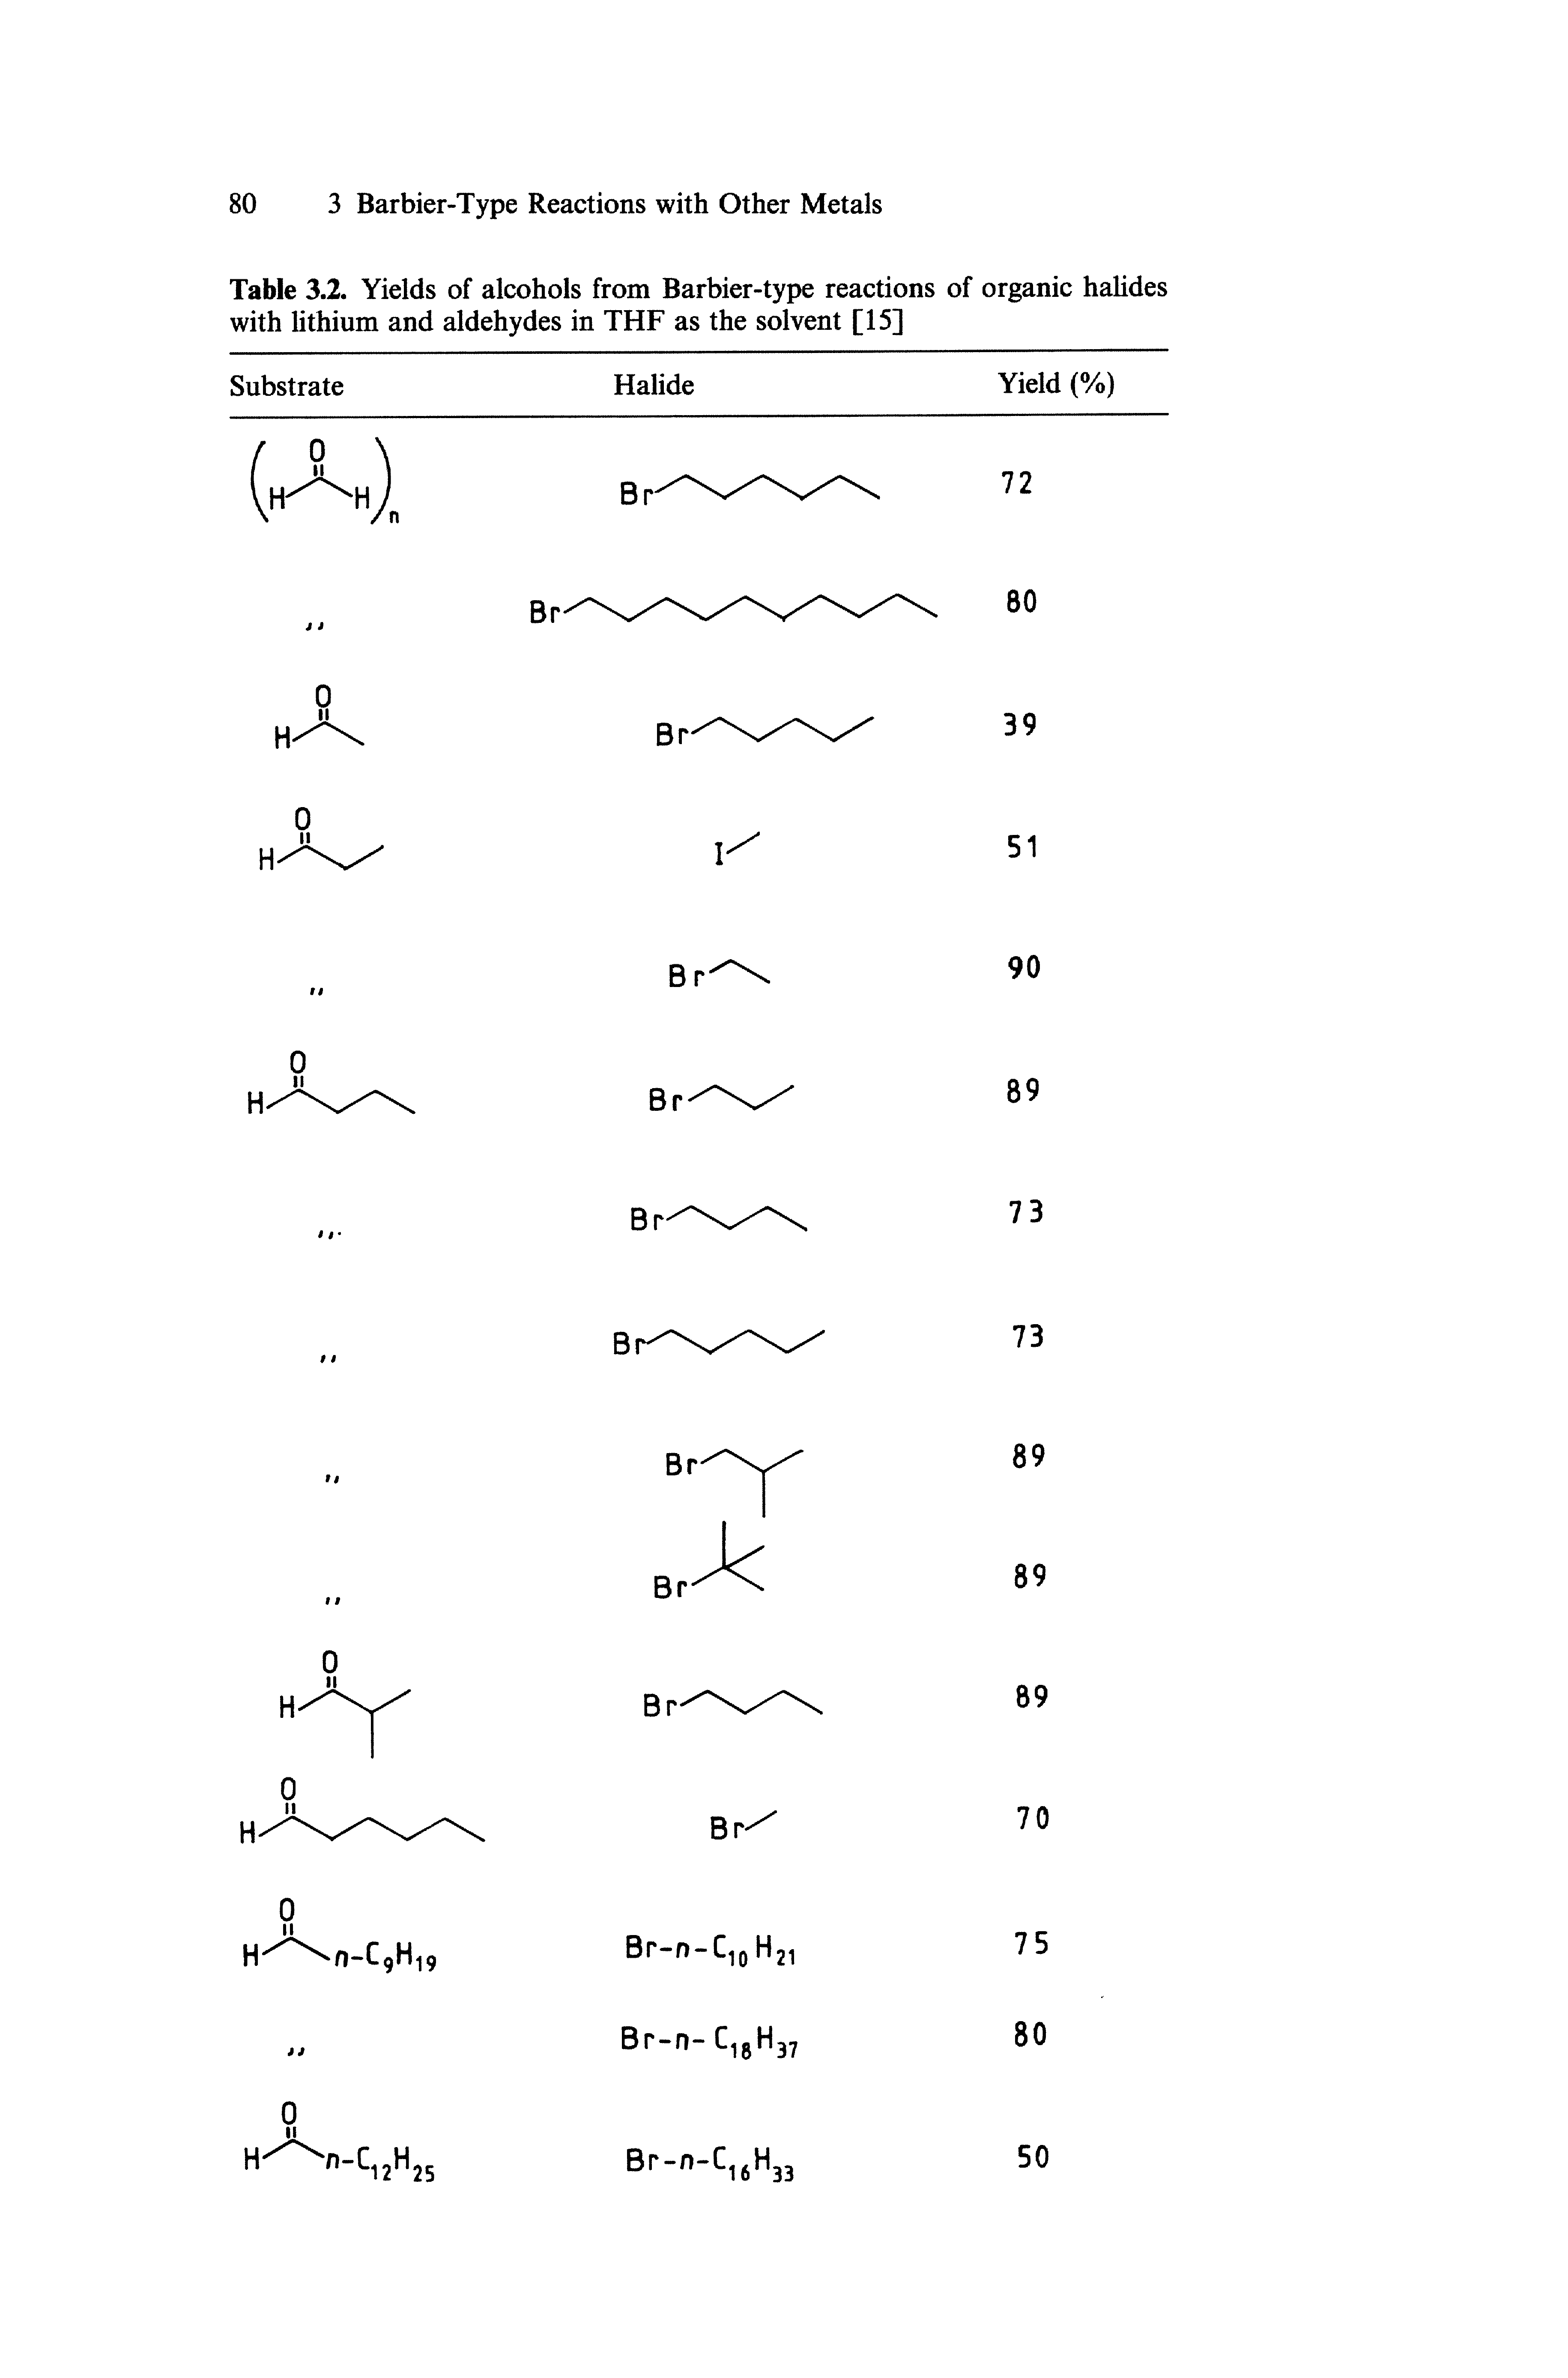 Table 3.2. Yields of alcohols from Barbier-type reactions of organic hahdes with lithium and aldehydes in THF as the solvent [15]...